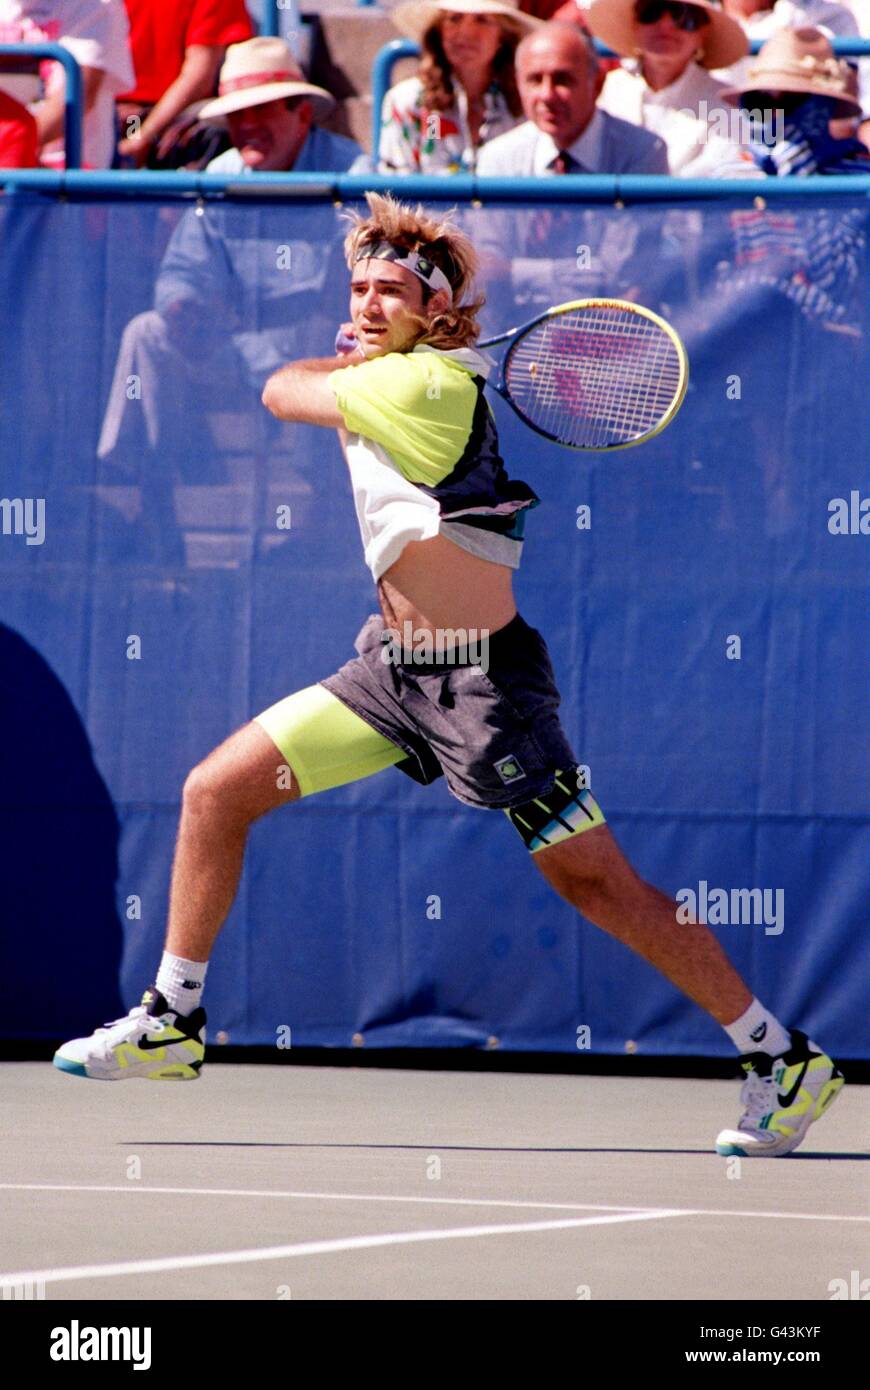 ANDRE AGASSI US OPEN TENNIS Stock Photo - Alamy